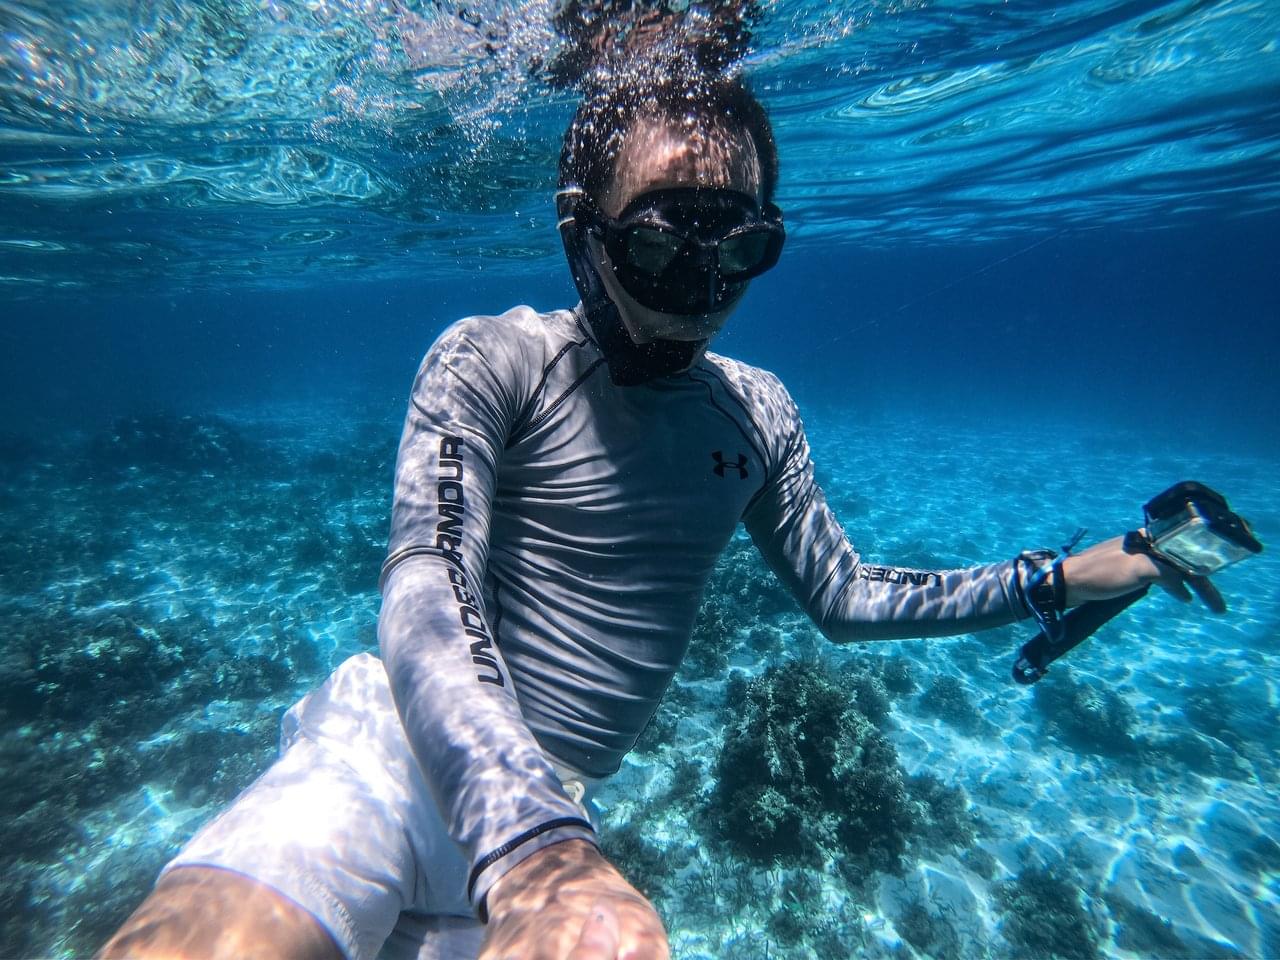 guy underwater with rash guard on